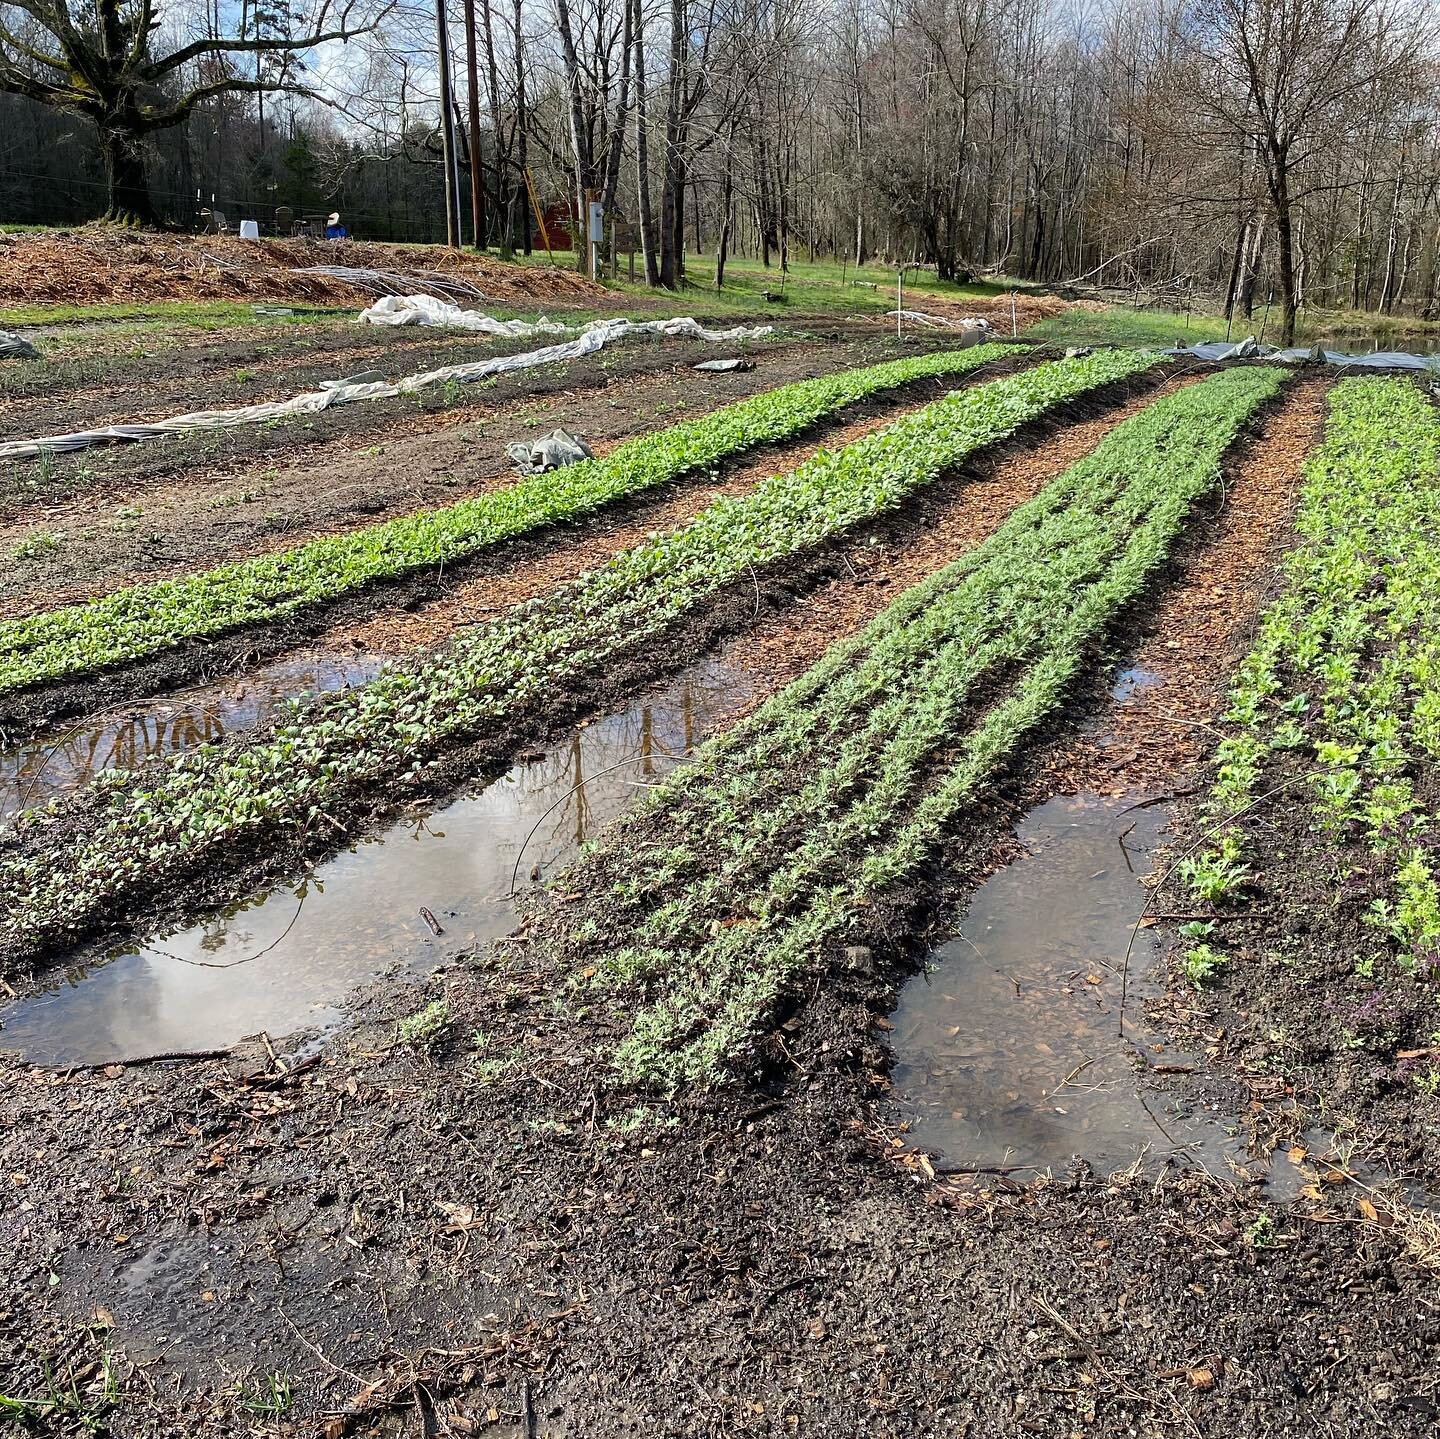 Guess I should have prioritized the extensive trenching project and moving mulch into the aisles over prepping beds to be planted last week.  The baby greens going in the first #farmshare still look good though!